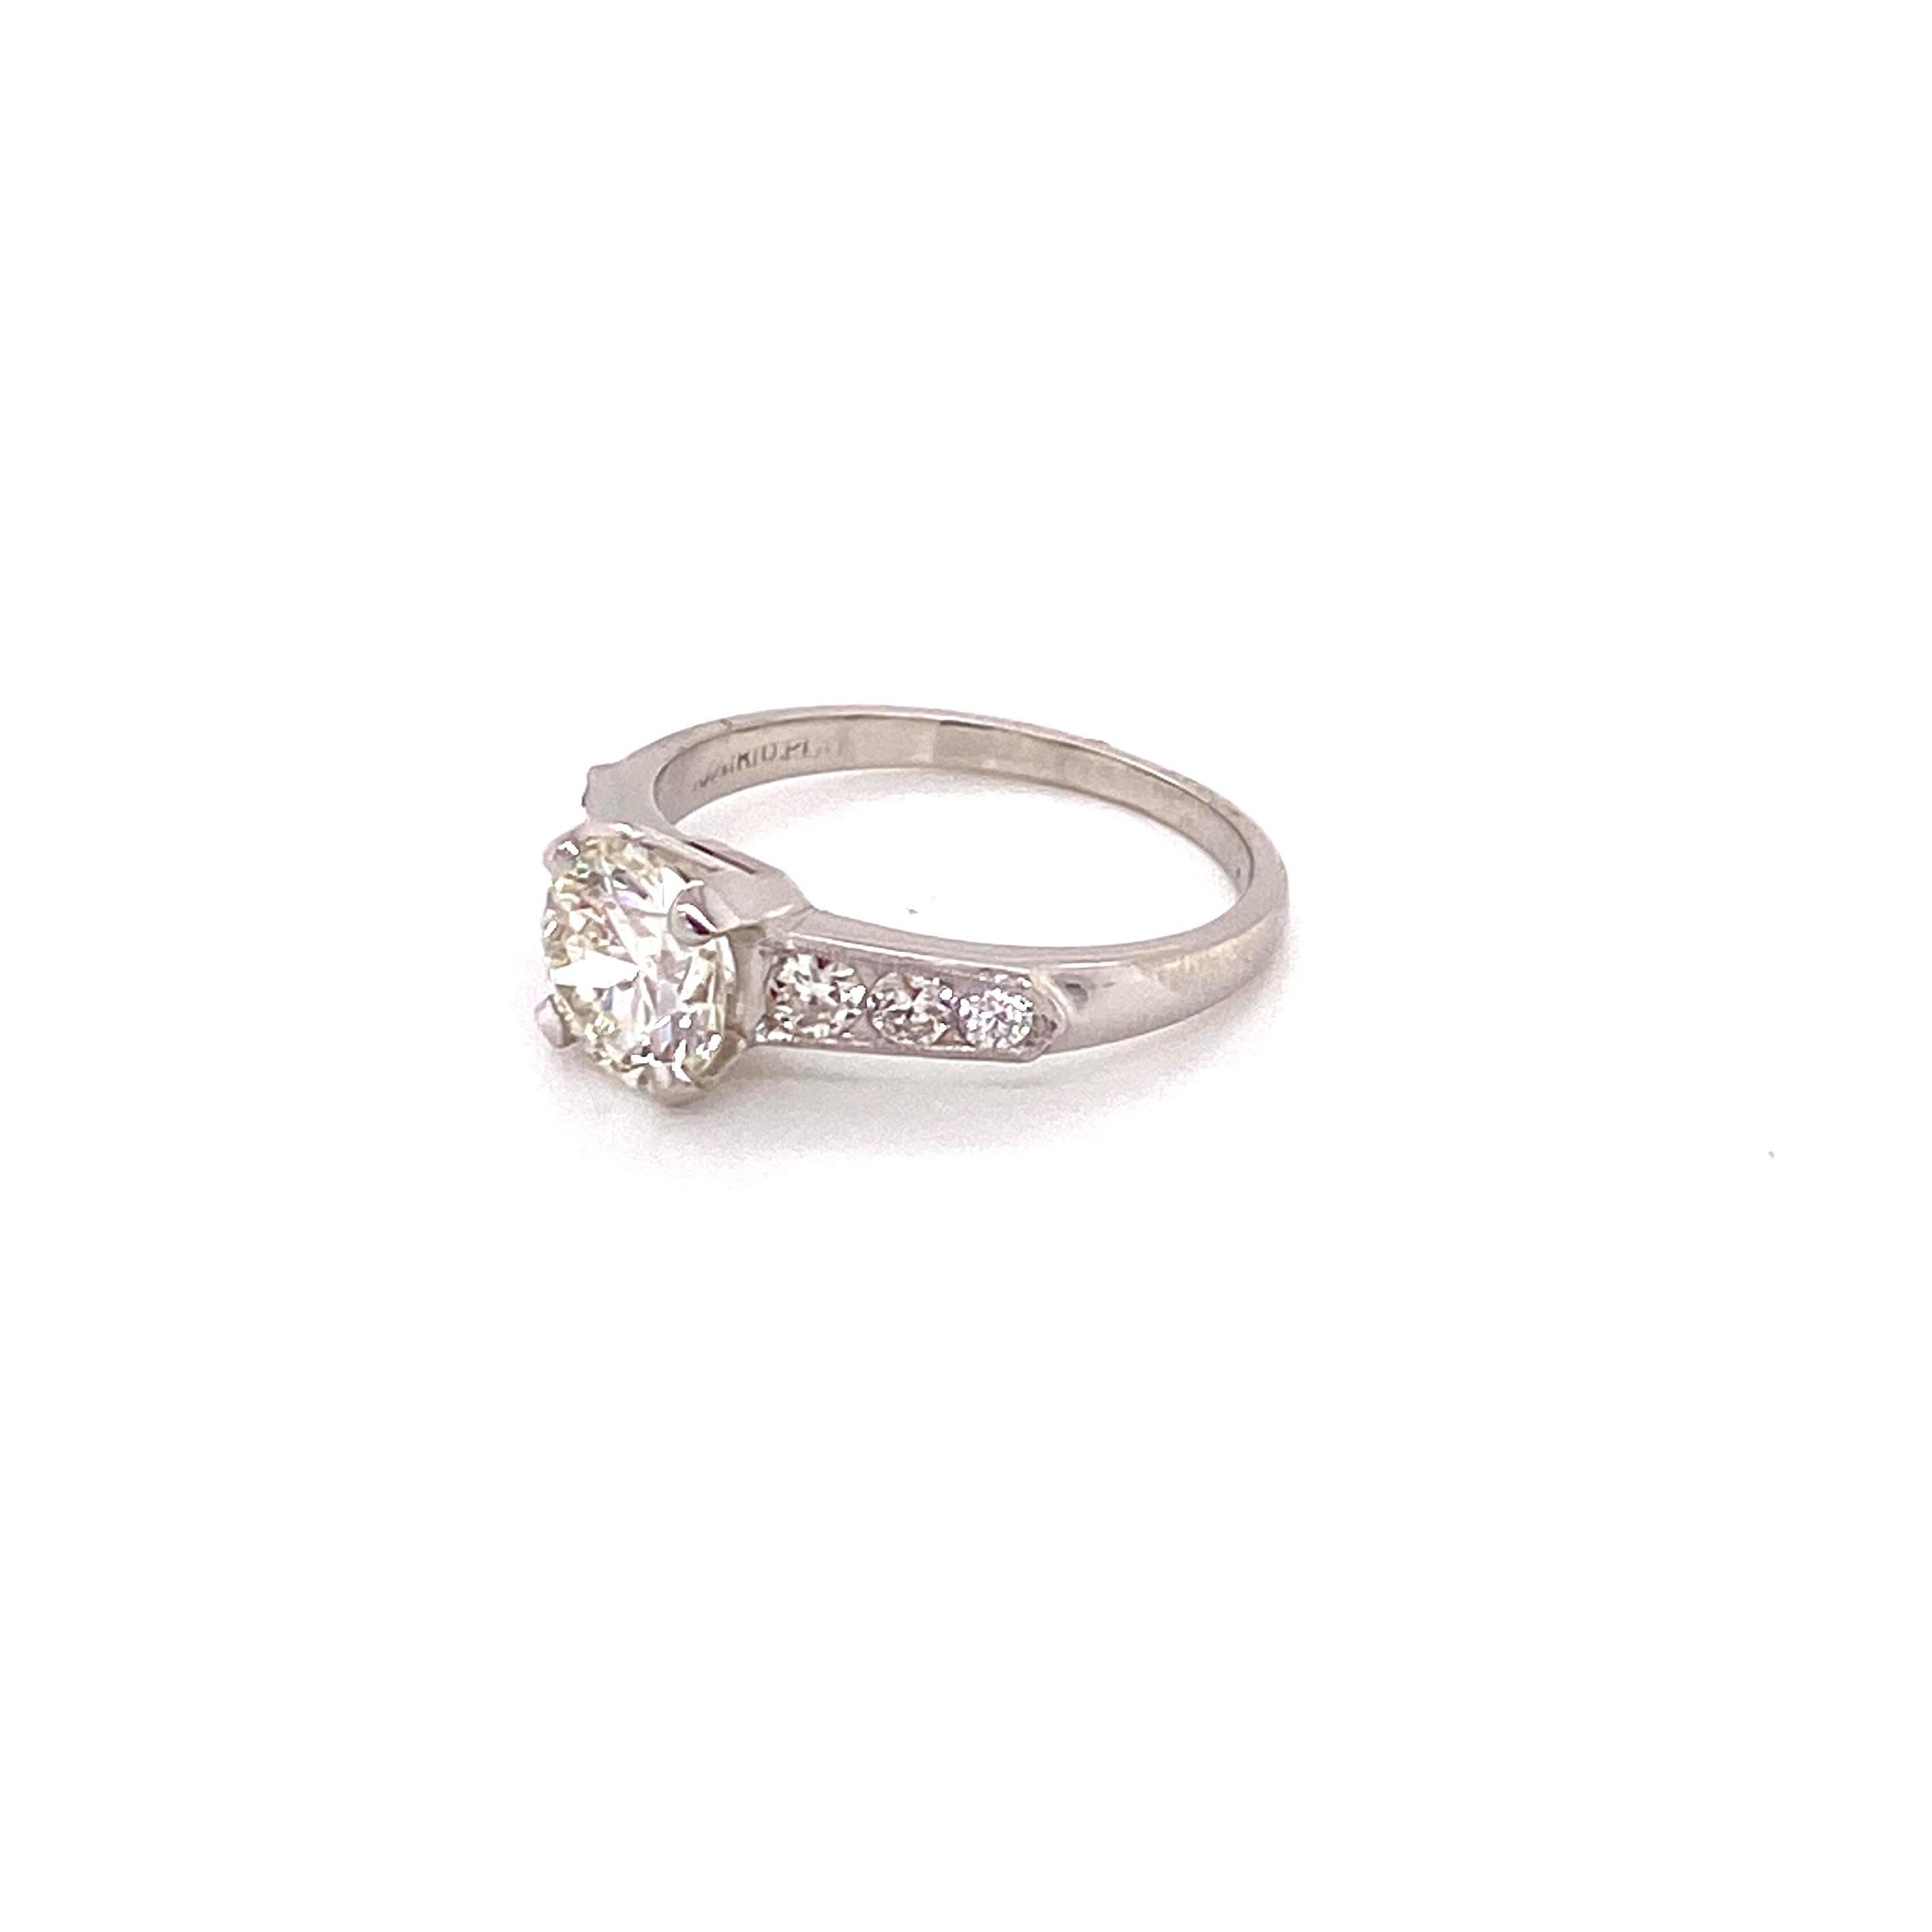 Vintage Platinum 1950s 1.31ct Round Diamond Ring - Center circular brilliant transitional cut diamonds weighs 1.31ct and has K color, and SI1 clarity. Channel set on either side with a milgrain border are 3 round diamonds with a total approximate